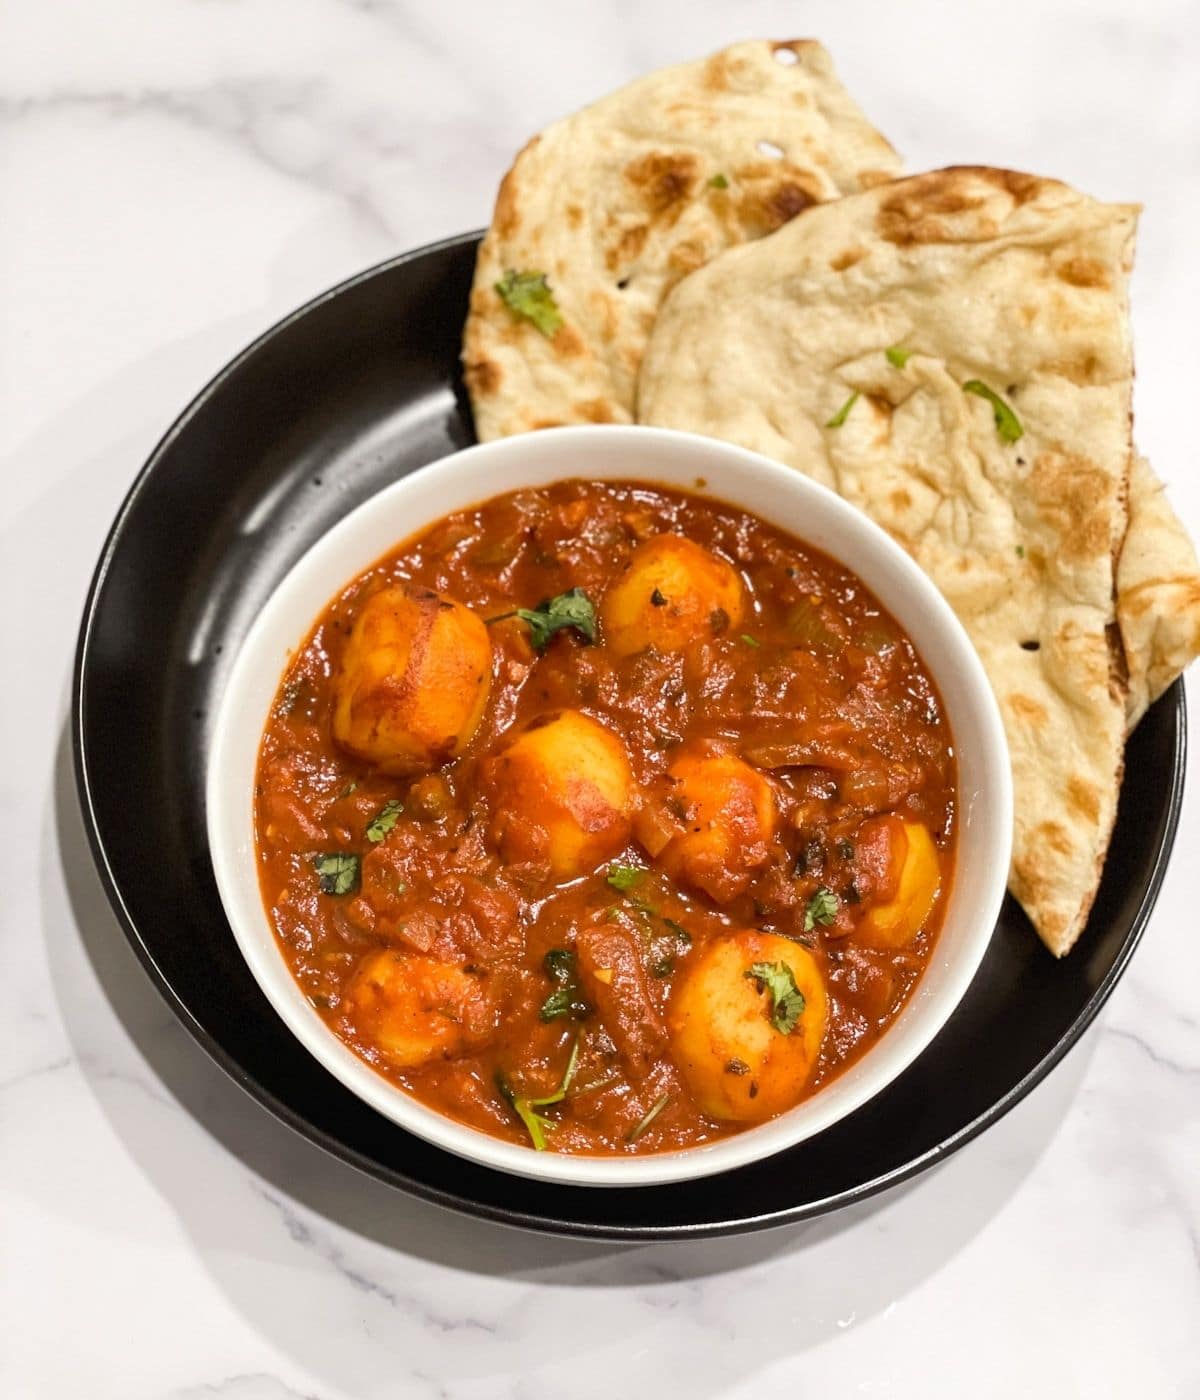 Instant pot dum aloo is poured on the bowl along with naan.